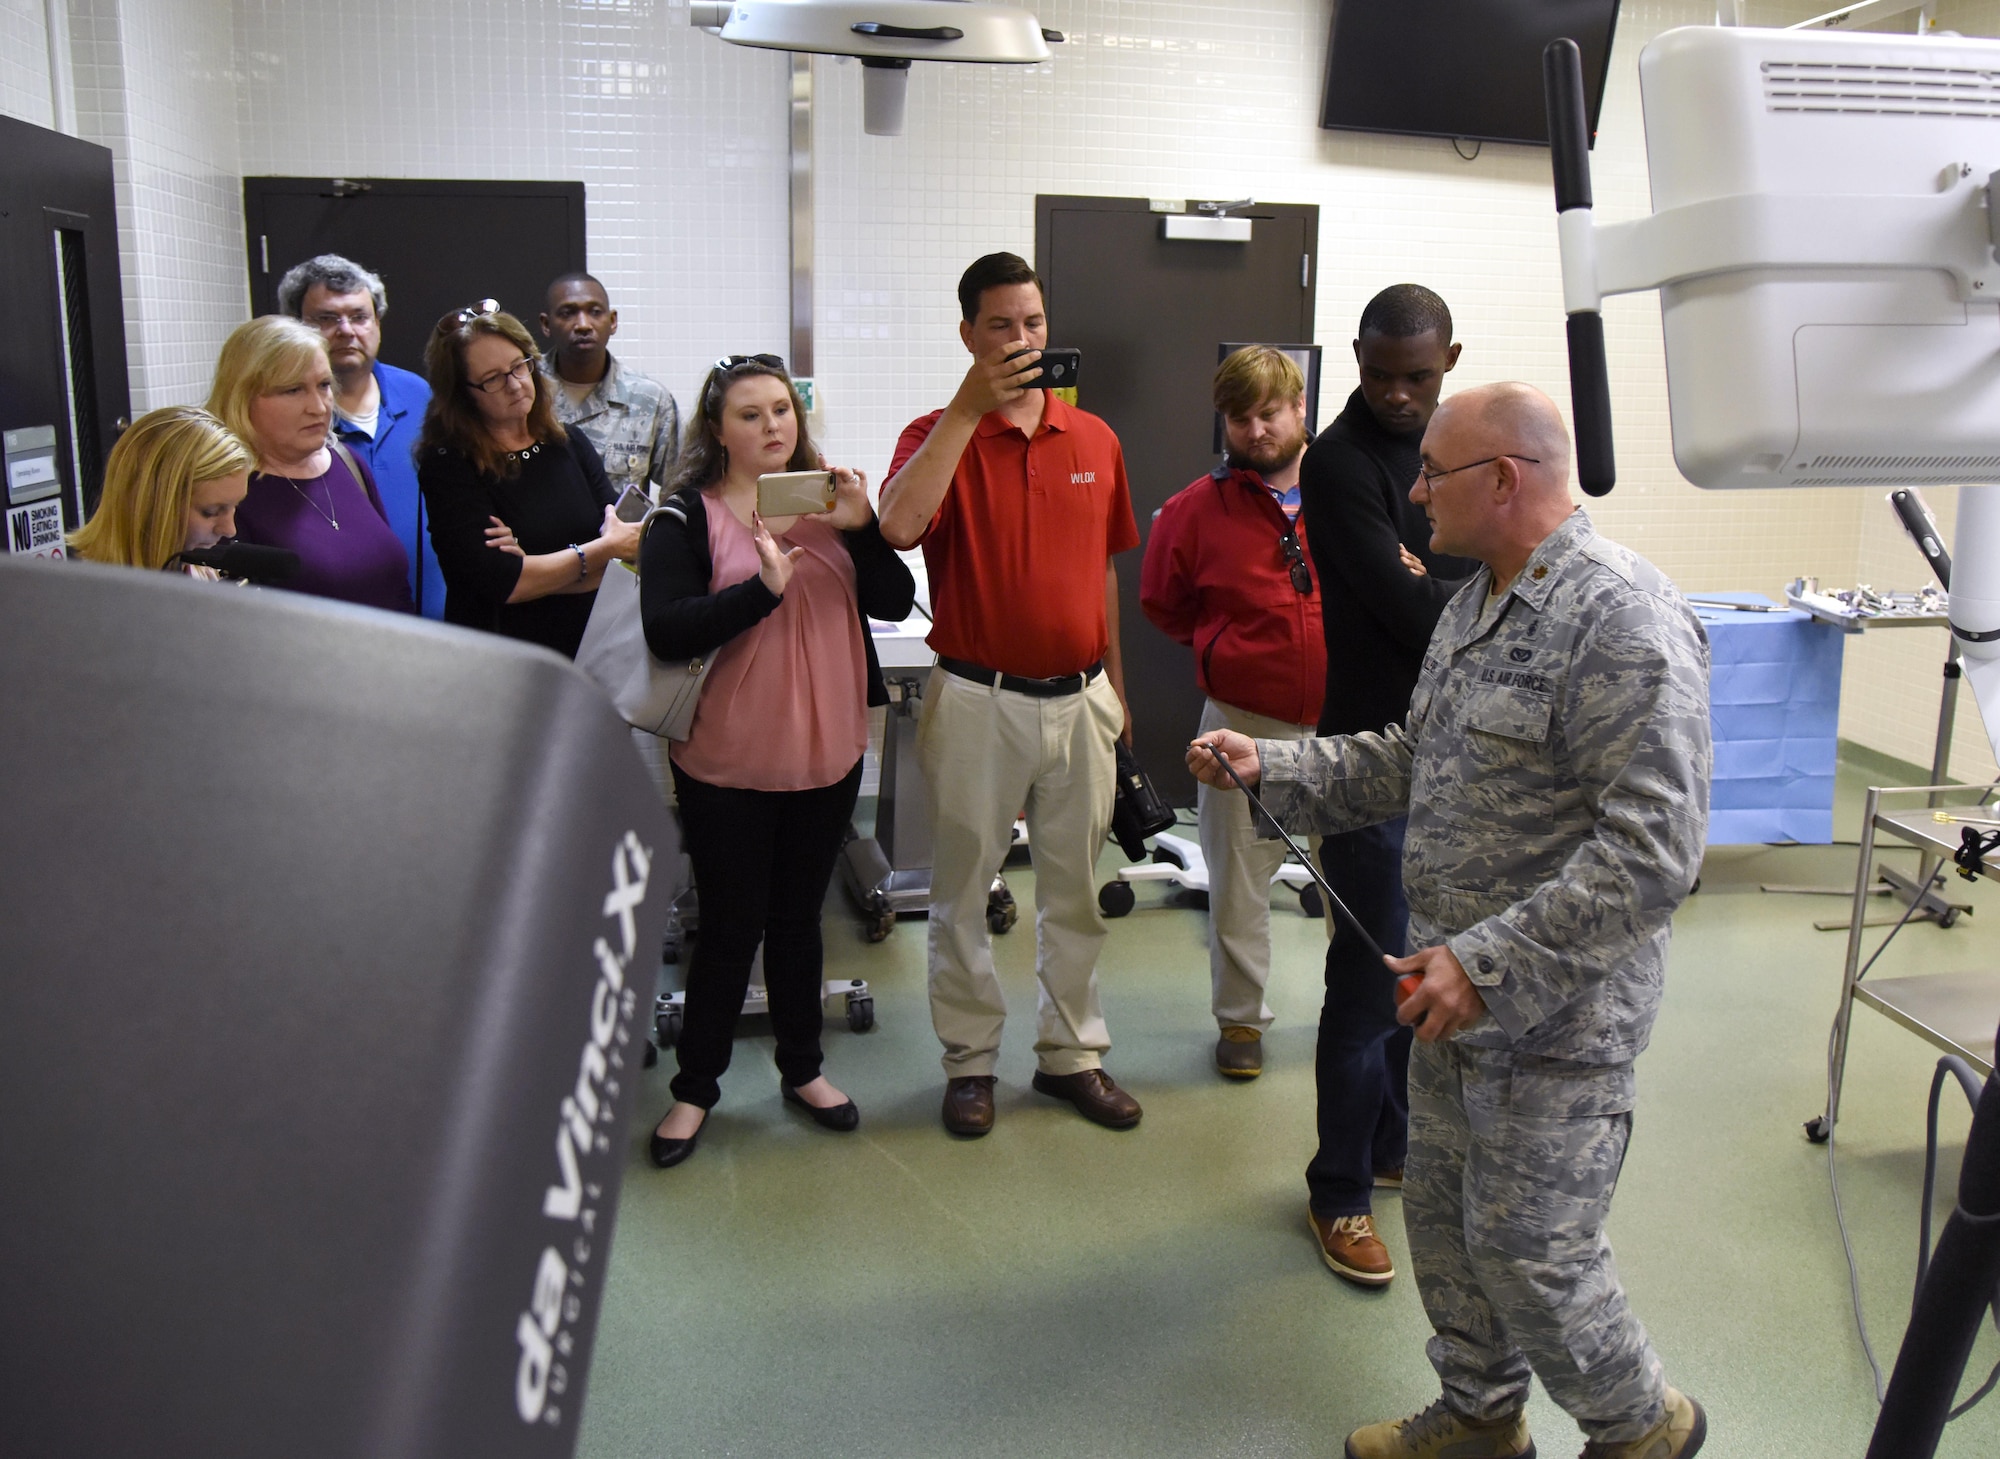 Maj. Scott Thallemer, 81st Surgical Operations Squadron informatics officer and robotics program coordinator, provides reporters from local media outlets with a briefing on the capabilities of robotics surgery at the clinical research lab during Media Day Oct. 26, 2017, on Keesler Air Force Base, Mississippi. In order to better understand Keesler’s mission, the reporters also toured the air traffic control tower, the 81st Security Forces Squadron indoor firing range and a 333rd Training Squadron cyber training course. (U.S. Air Force photo by Kemberly Groue)